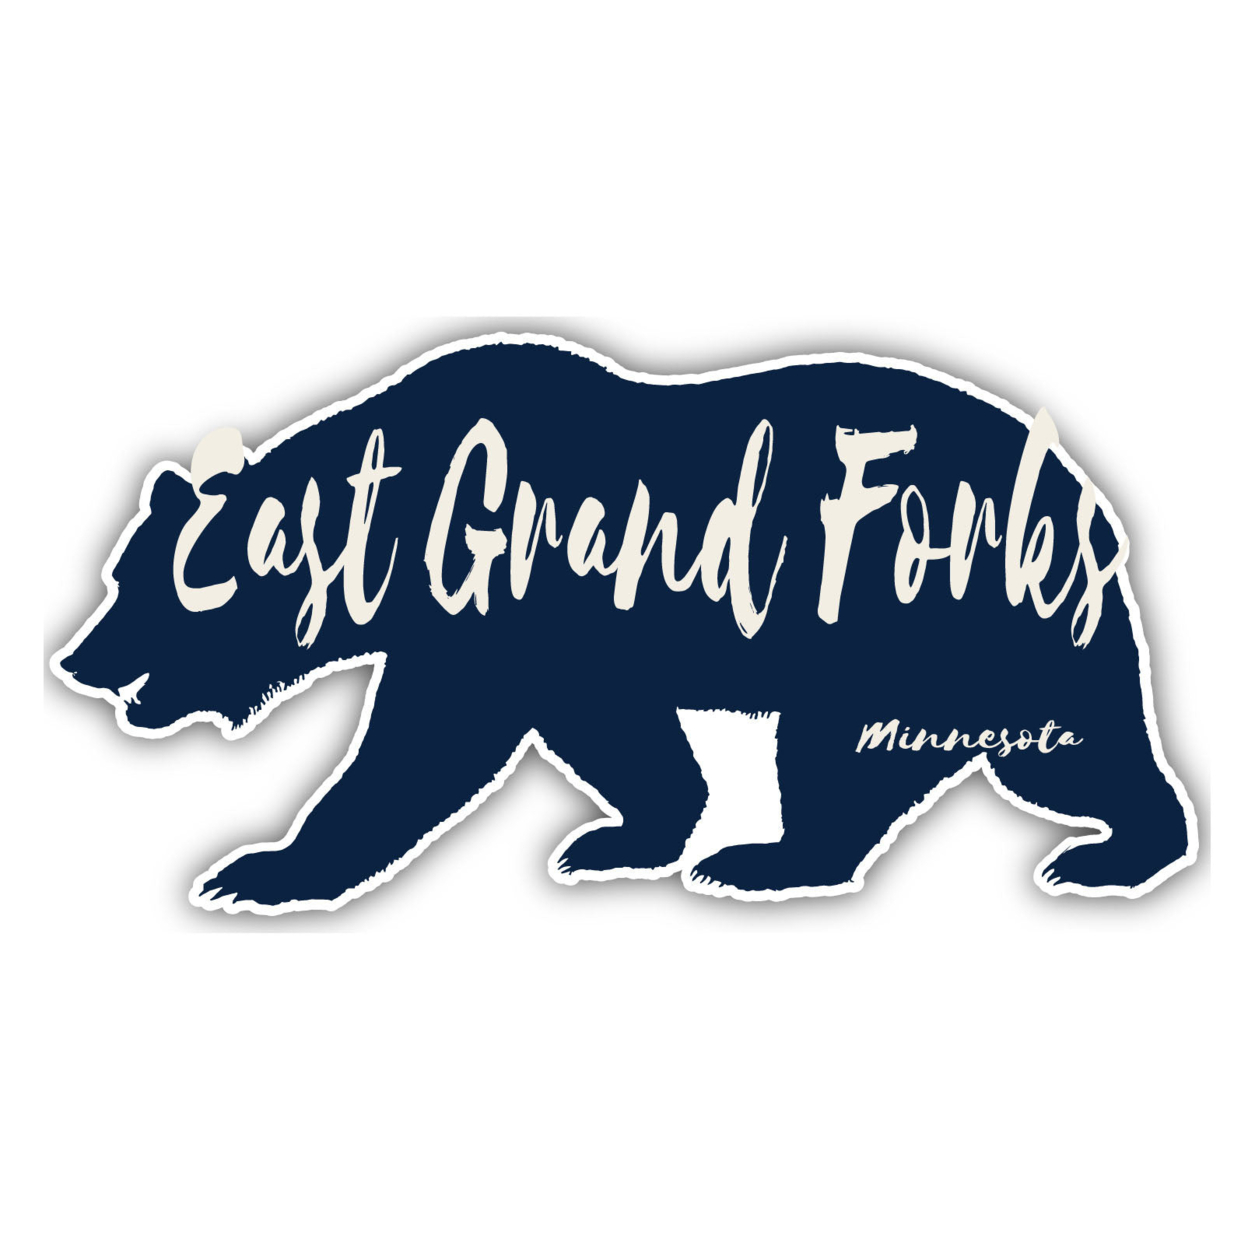 East Grand Forks Minnesota Souvenir Decorative Stickers (Choose Theme And Size) - 4-Pack, 2-Inch, Bear